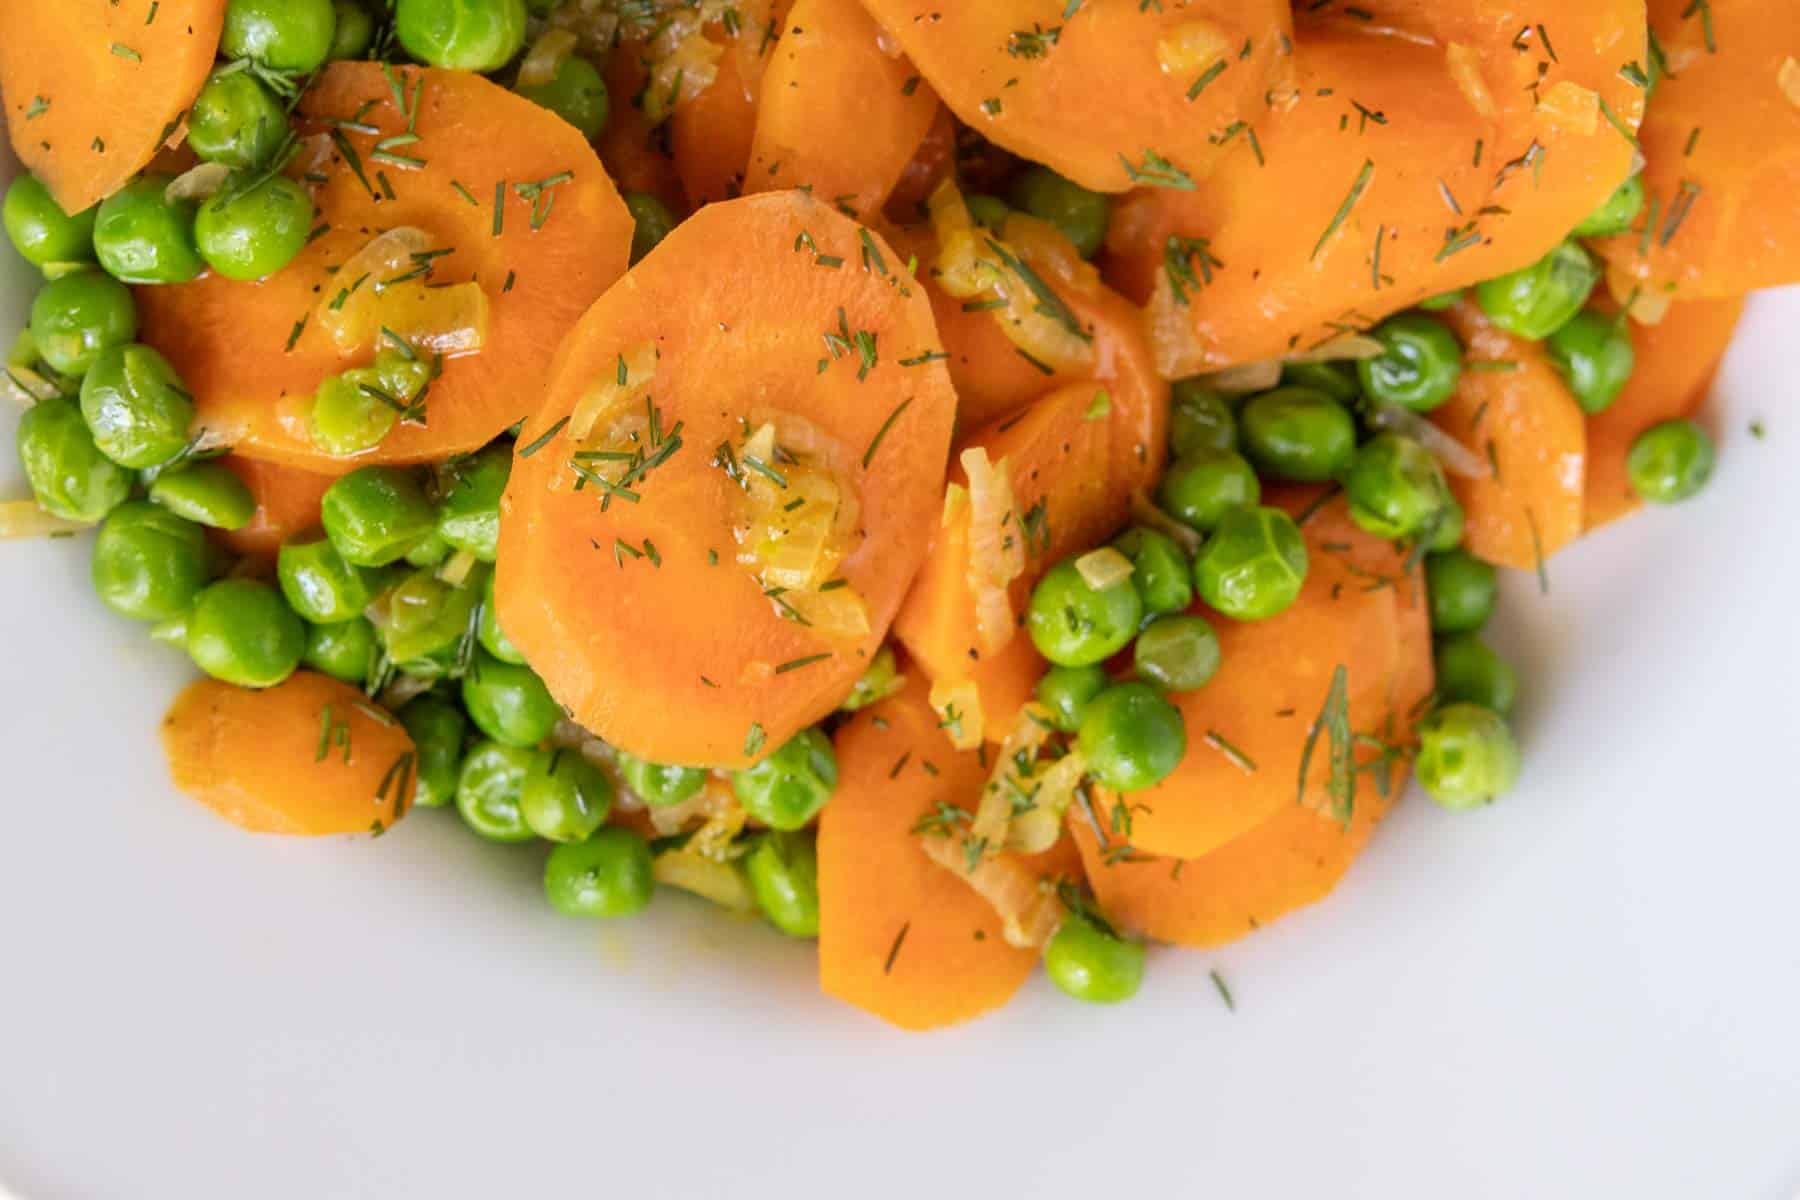 Sliced carrots and green peas seasoned with herbs on a white plate.